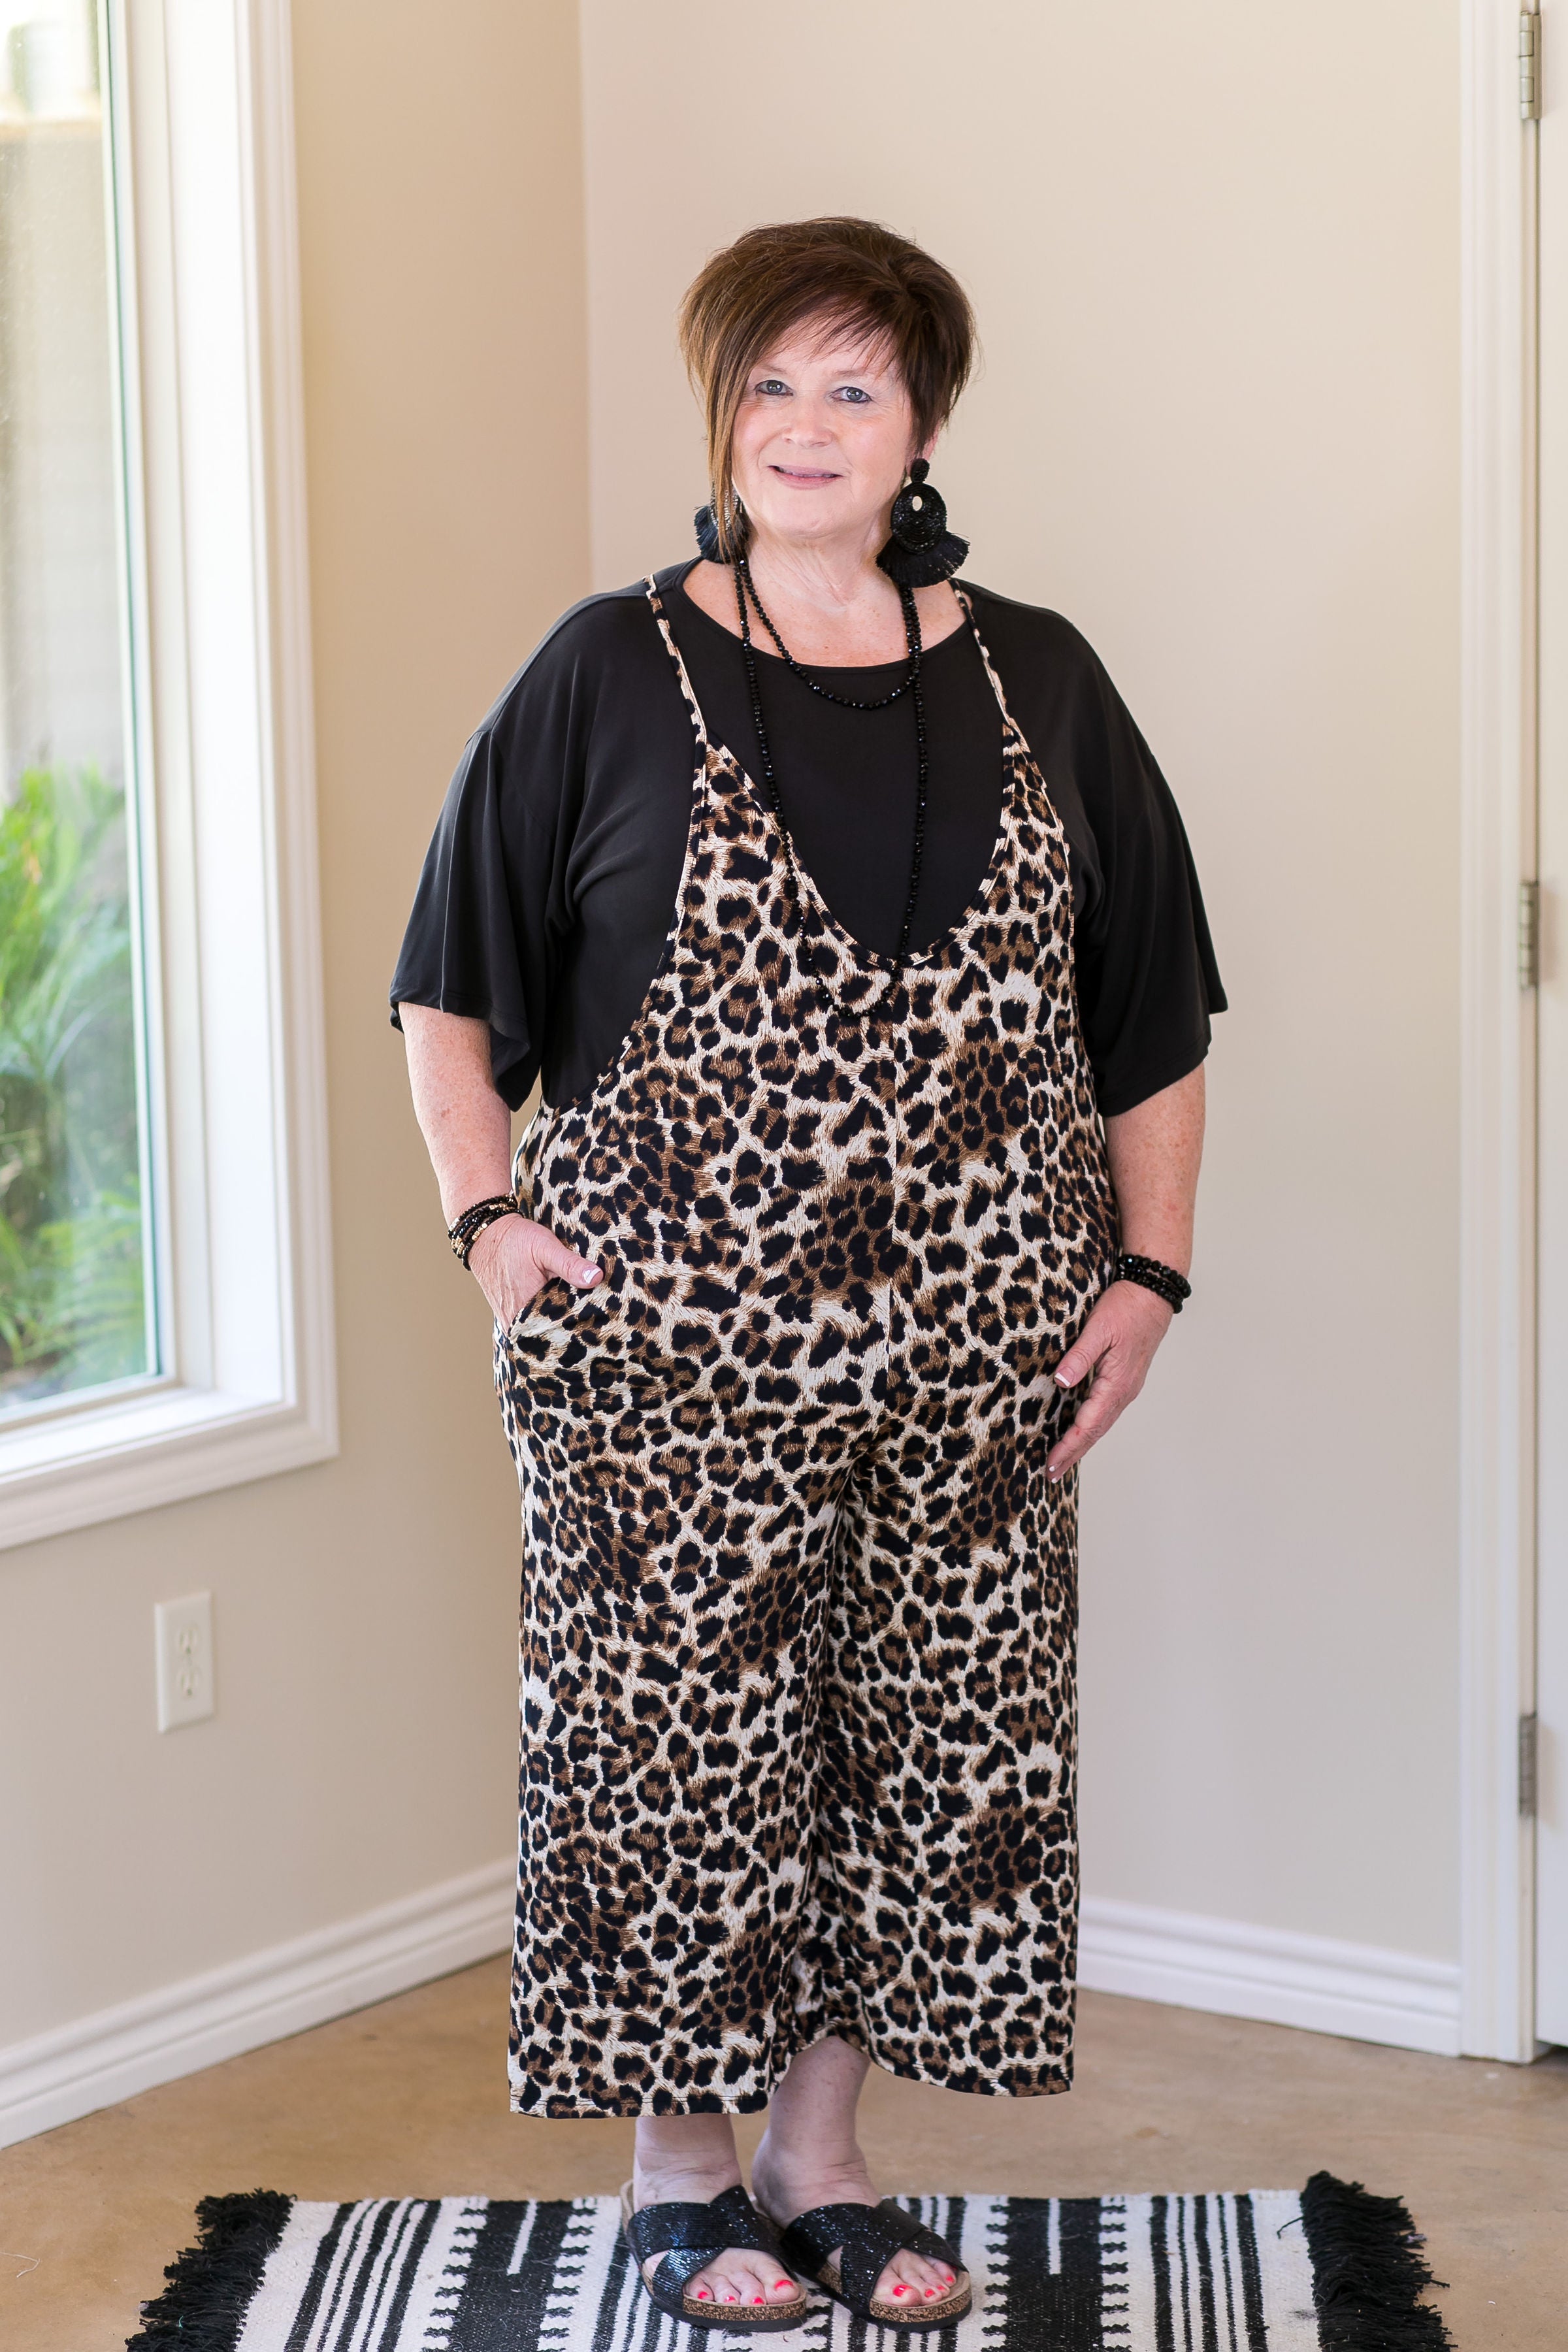 Heimish all she wrote Women's trendy plus size boutique clothing affordable curvy girl fashion full figured jumpsuit jumper romper overisized wide leg travel outfit blogger Instagram influencer leopard cheetah pockets